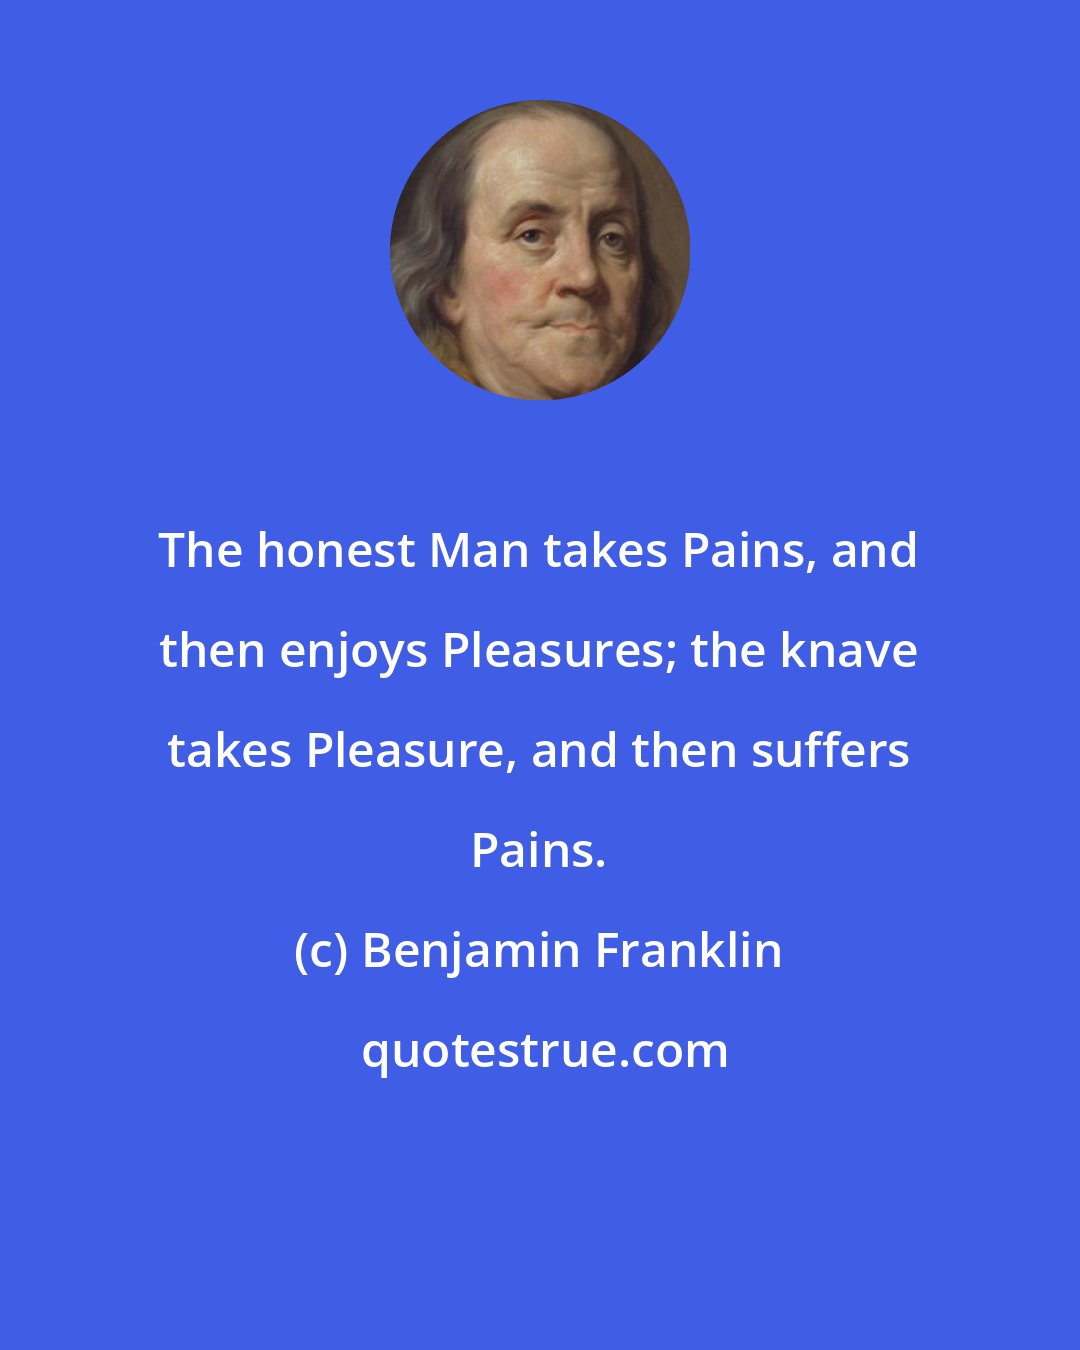 Benjamin Franklin: The honest Man takes Pains, and then enjoys Pleasures; the knave takes Pleasure, and then suffers Pains.